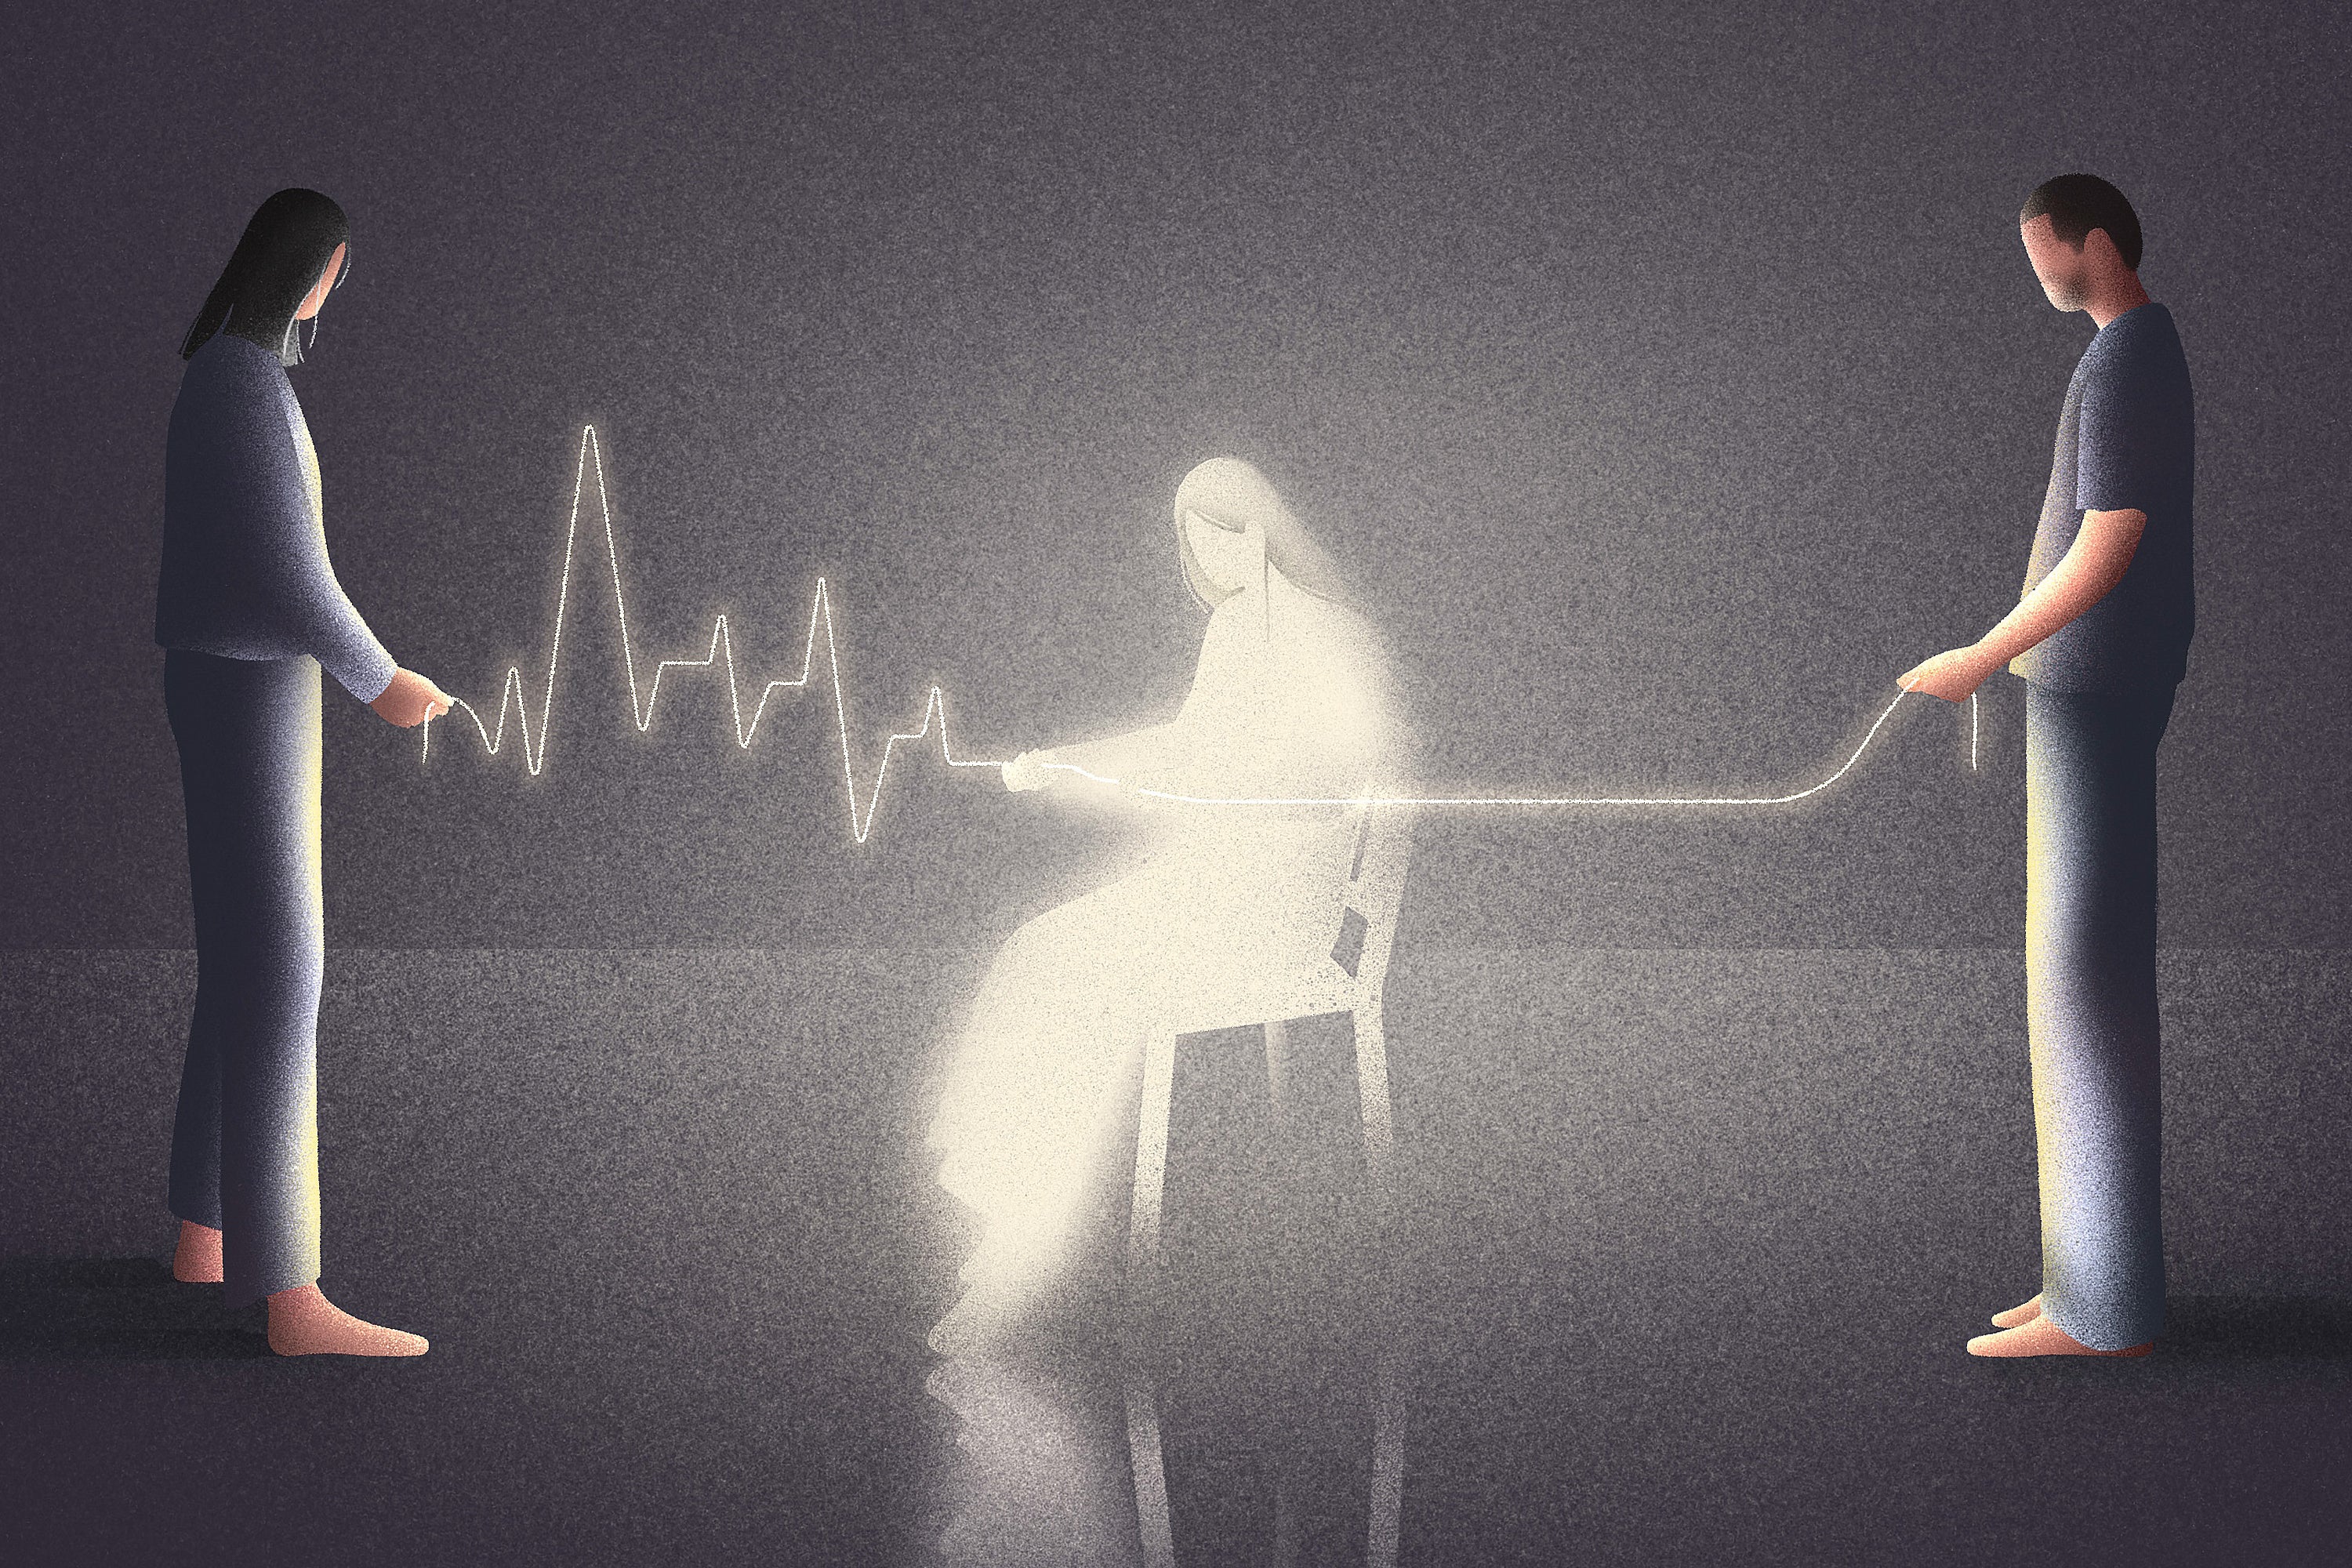 An illustration of an ethereal, ghostly woman seated in a chair between two people. The two people hold either end of an EKG chart that runs through the seated woman. One side of the chart is spiky, representing a heartbeat, and the other side is flat, representing death.